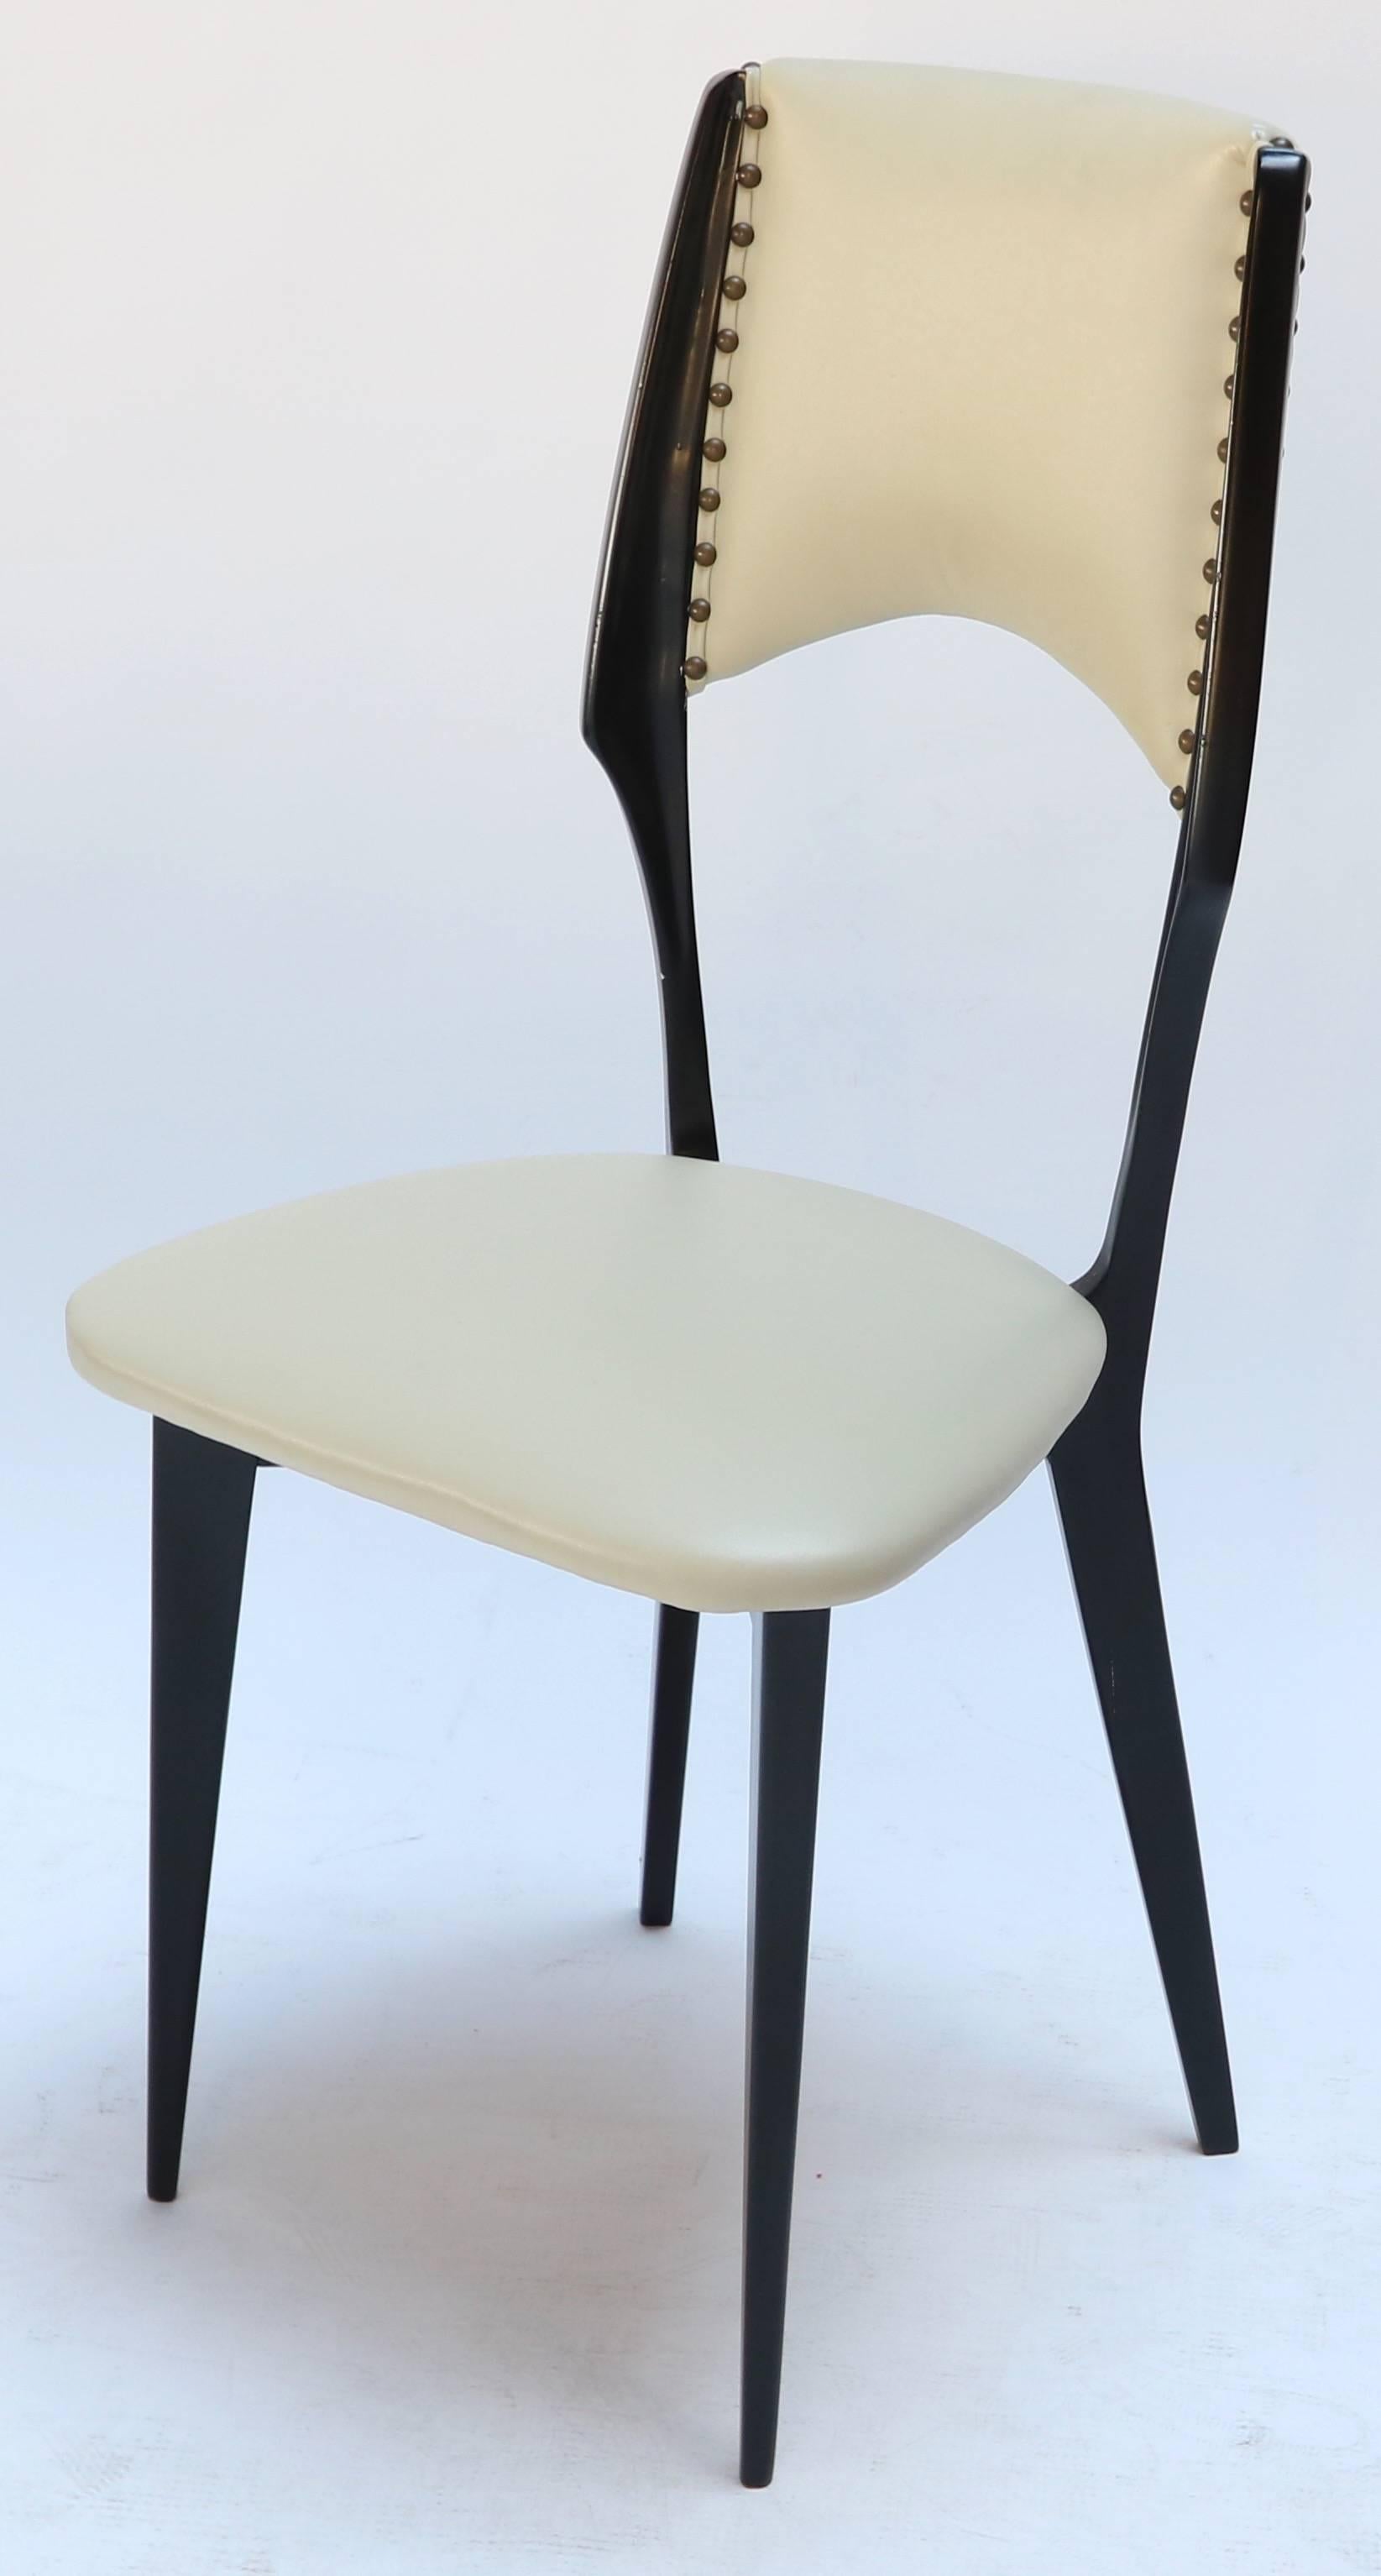 Set of ten 1960s Italian ebonized wood dining chairs in the style of Ico Parisi, circa 1962-1964, upholstered in beige leather with decorative brass studs.